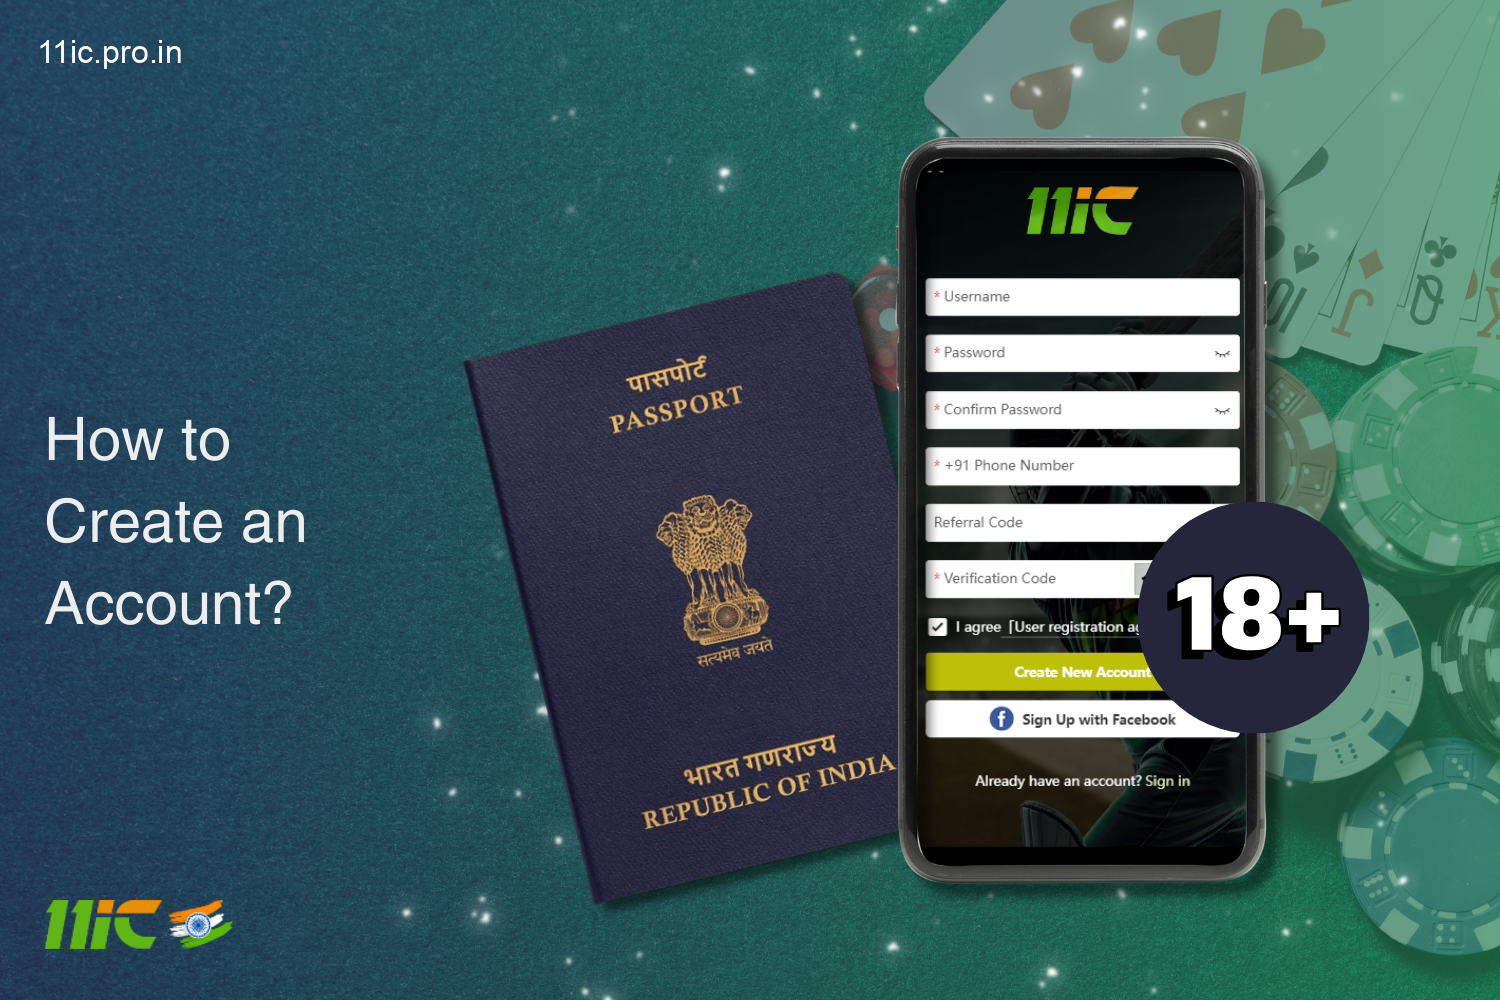 Creating an 11ic account is quick and easy for every Indian user above 18 years of age